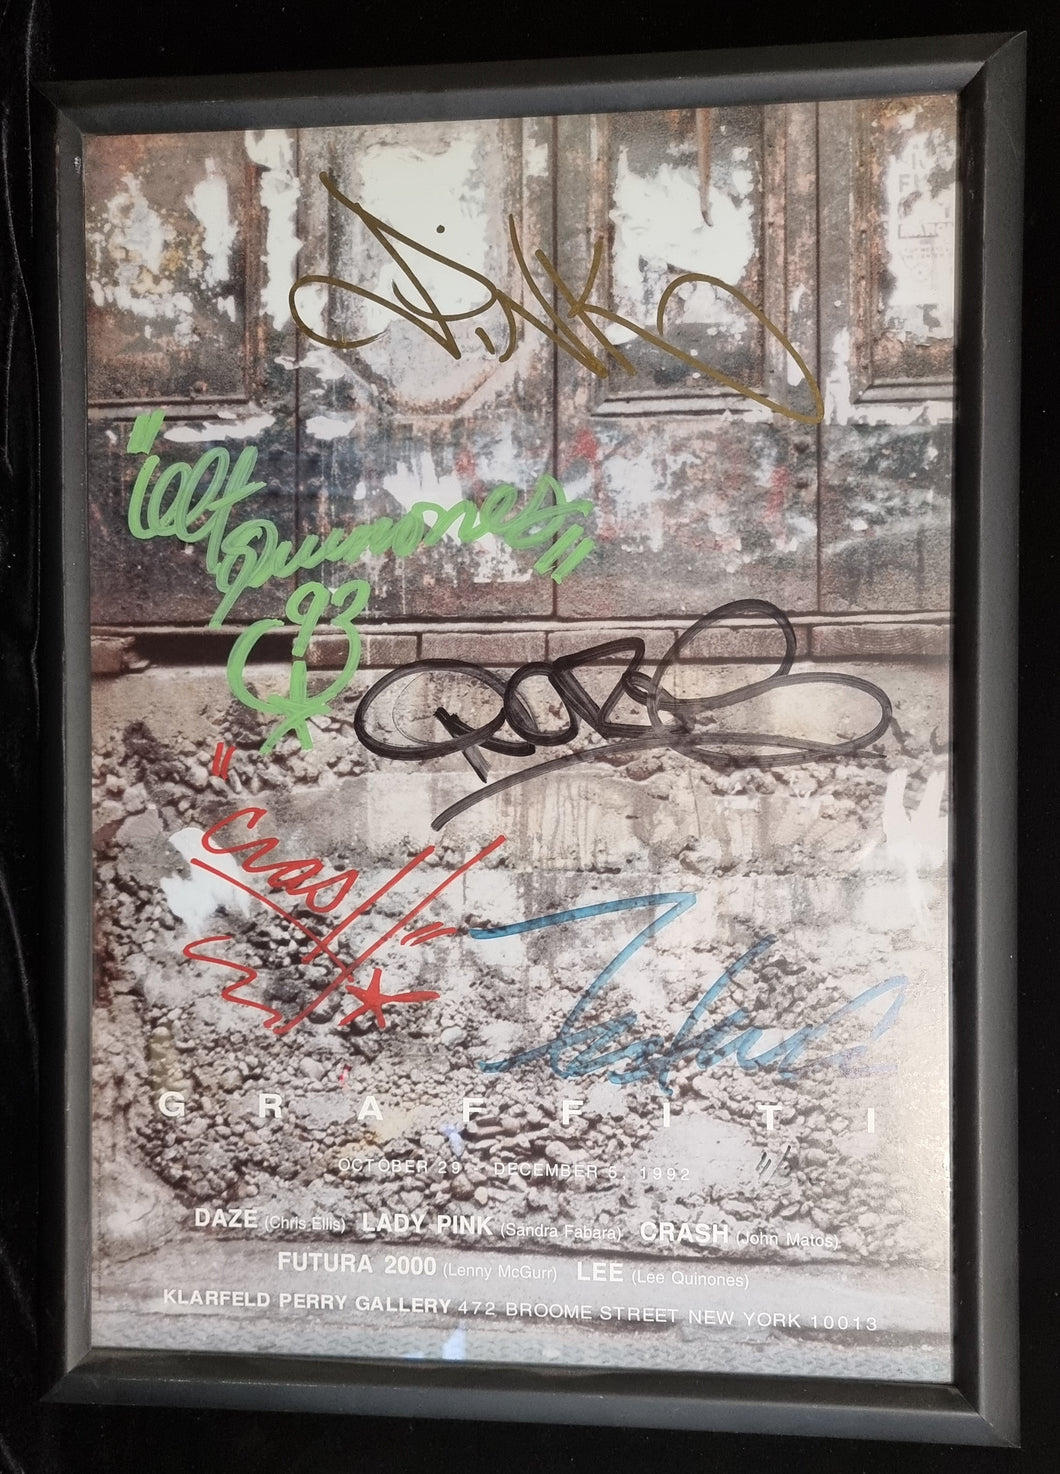 FUTURA 2000 + LEE QUINONES + CRASH + LADY PINK + DAZE - Hand Signed Poster from 1992